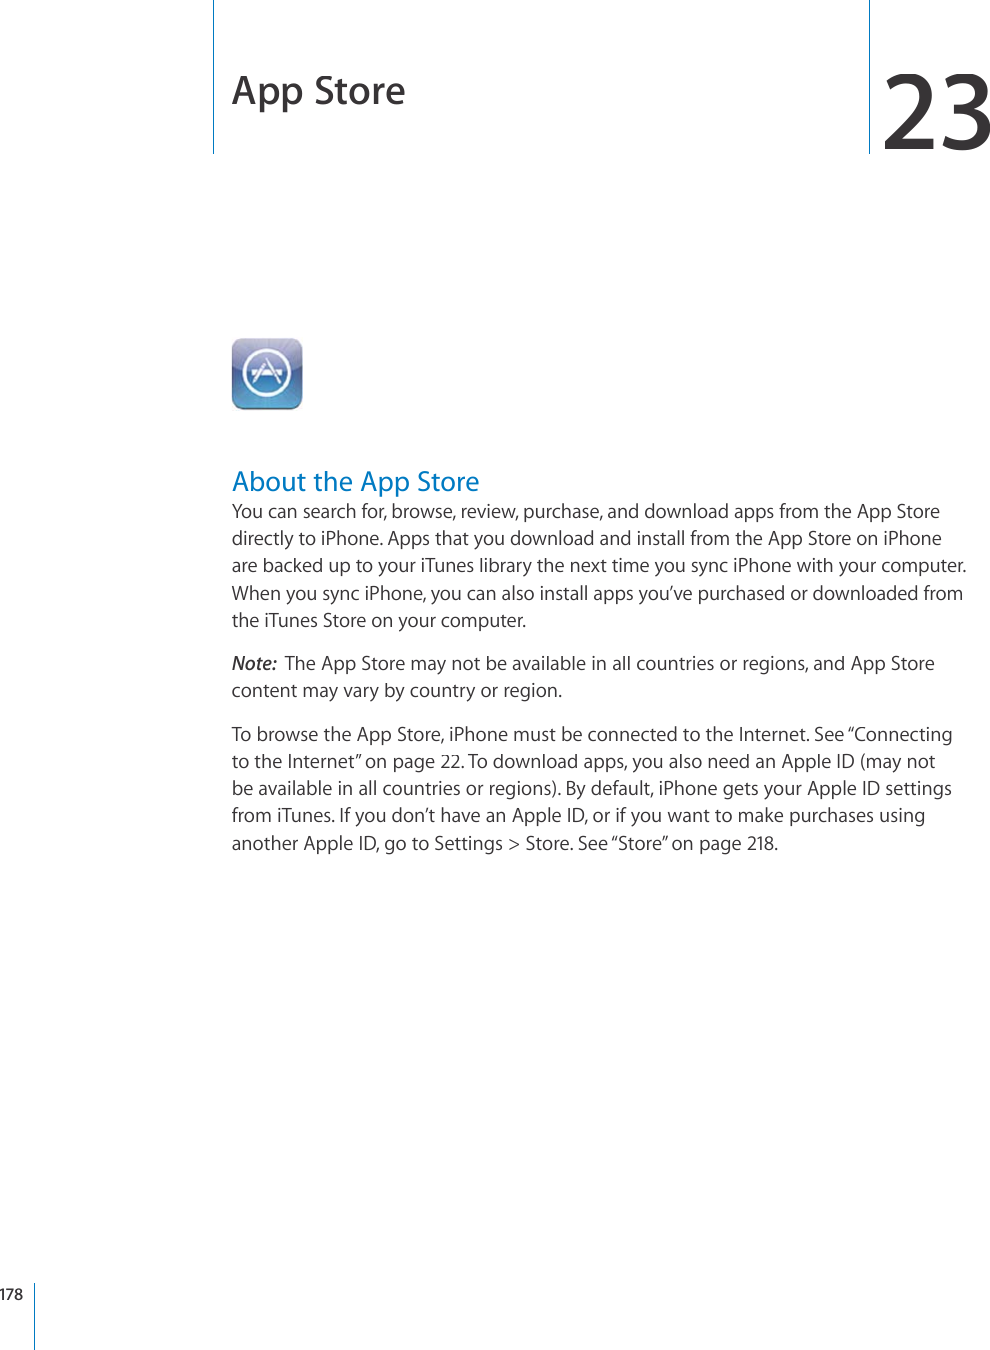 App Store23About the App StoreYou can search for, browse, review, purchase, and download apps from the App Storedirectly to iPhone. Apps that you download and install from the App Store on iPhoneare backed up to your iTunes library the next time you sync iPhone with your computer. When you sync iPhone, you can also install apps you’ve purchased or downloaded fromthe iTunes Store on your computer.Note:The App Store may not be available in all countries or regions, and App Storecontent may vary by country or region.To browse the App Store, iPhone must be connected to the Internet. See “Connectingto the Internet”on page22. To download apps, you also need an Apple ID (may notbe available in all countries or regions). By default, iPhone gets your Apple ID settingsfrom iTunes. If you don’t have an Apple ID, or if you want to make purchases usinganother Apple ID, go to Settings &gt; Store. See “Store”on page218.178